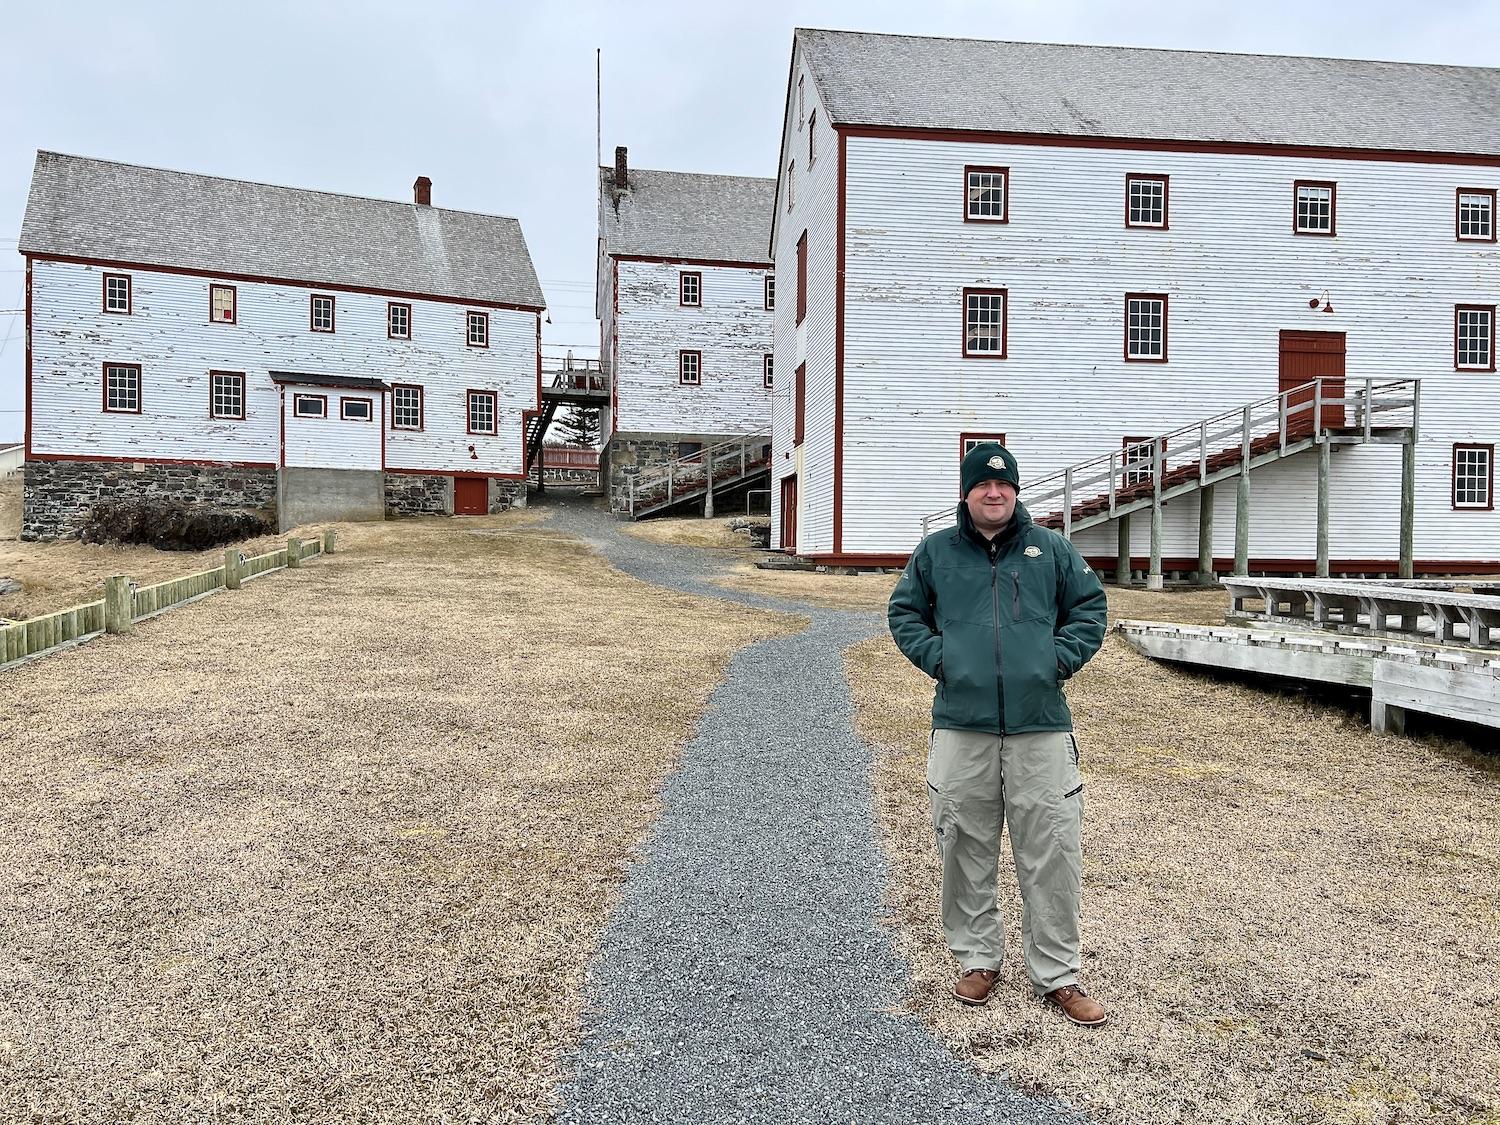 Parks Canada's Jonathan Harrison stands by the white clapboard buildings at Ryan Premises National Historic Site in May before the site opened for the season.